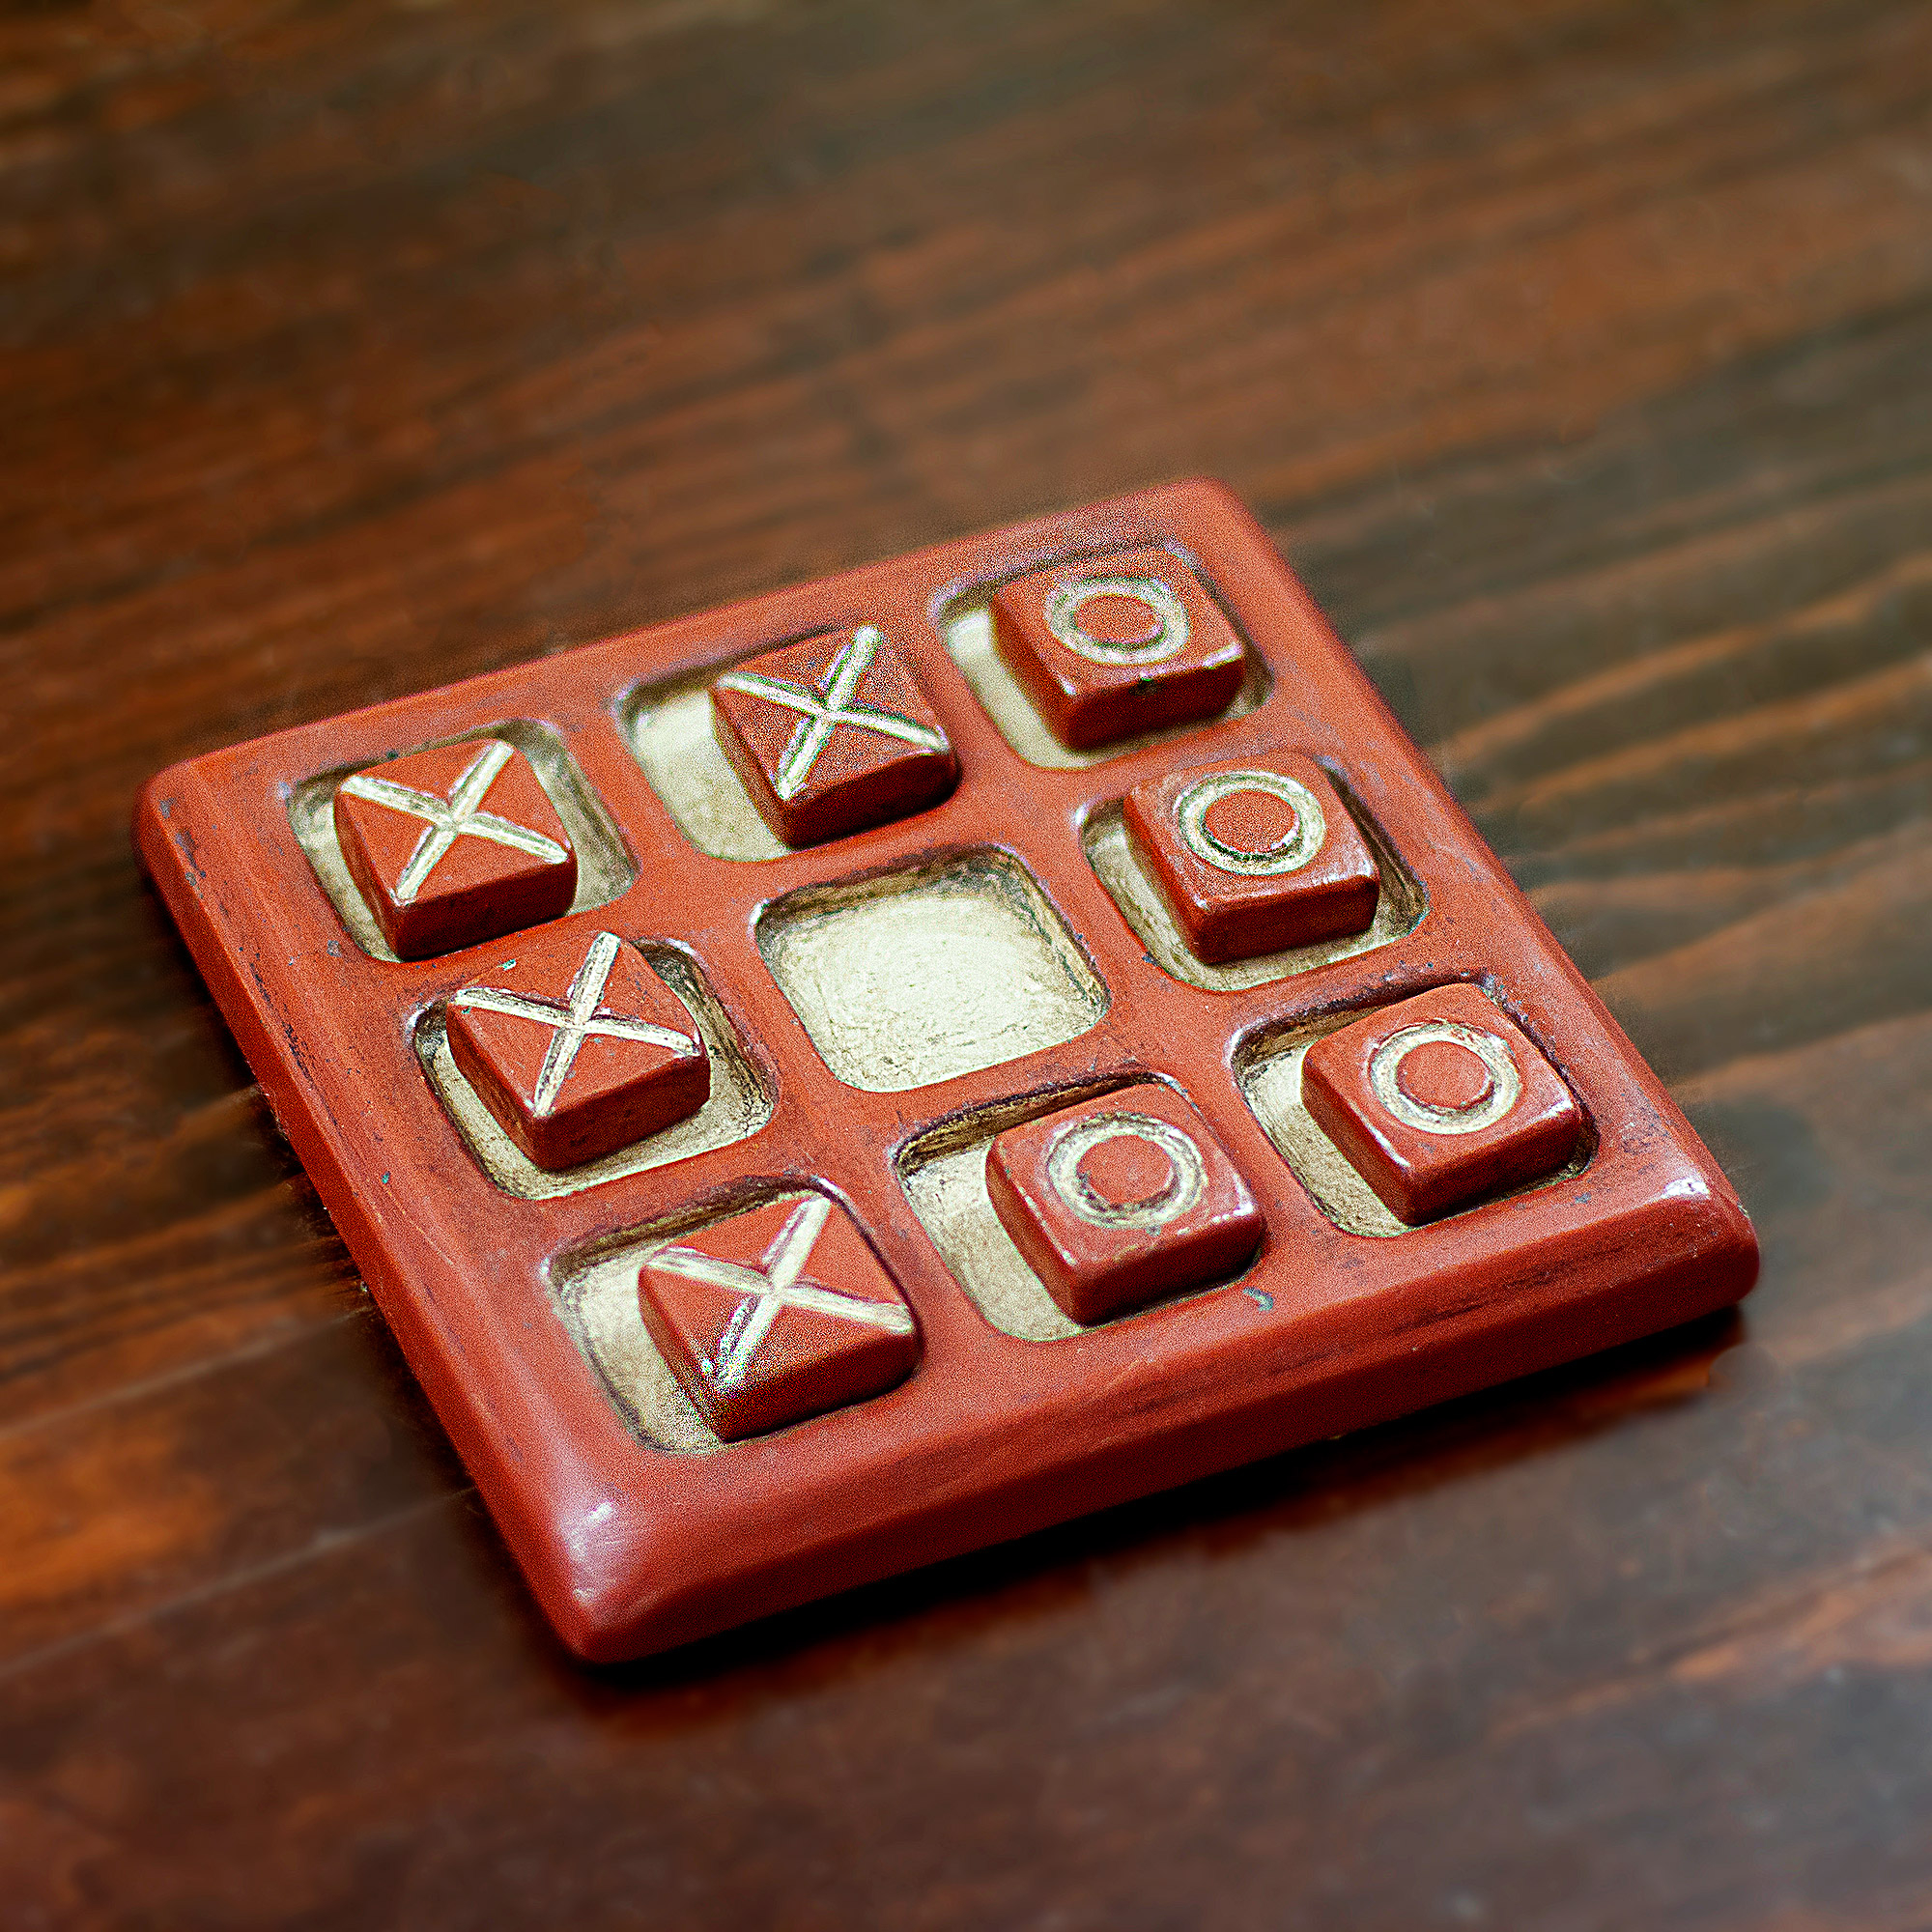 Burnished Ceramic Tic-Tac-Toe Board from Mexico - Burnished Challenge